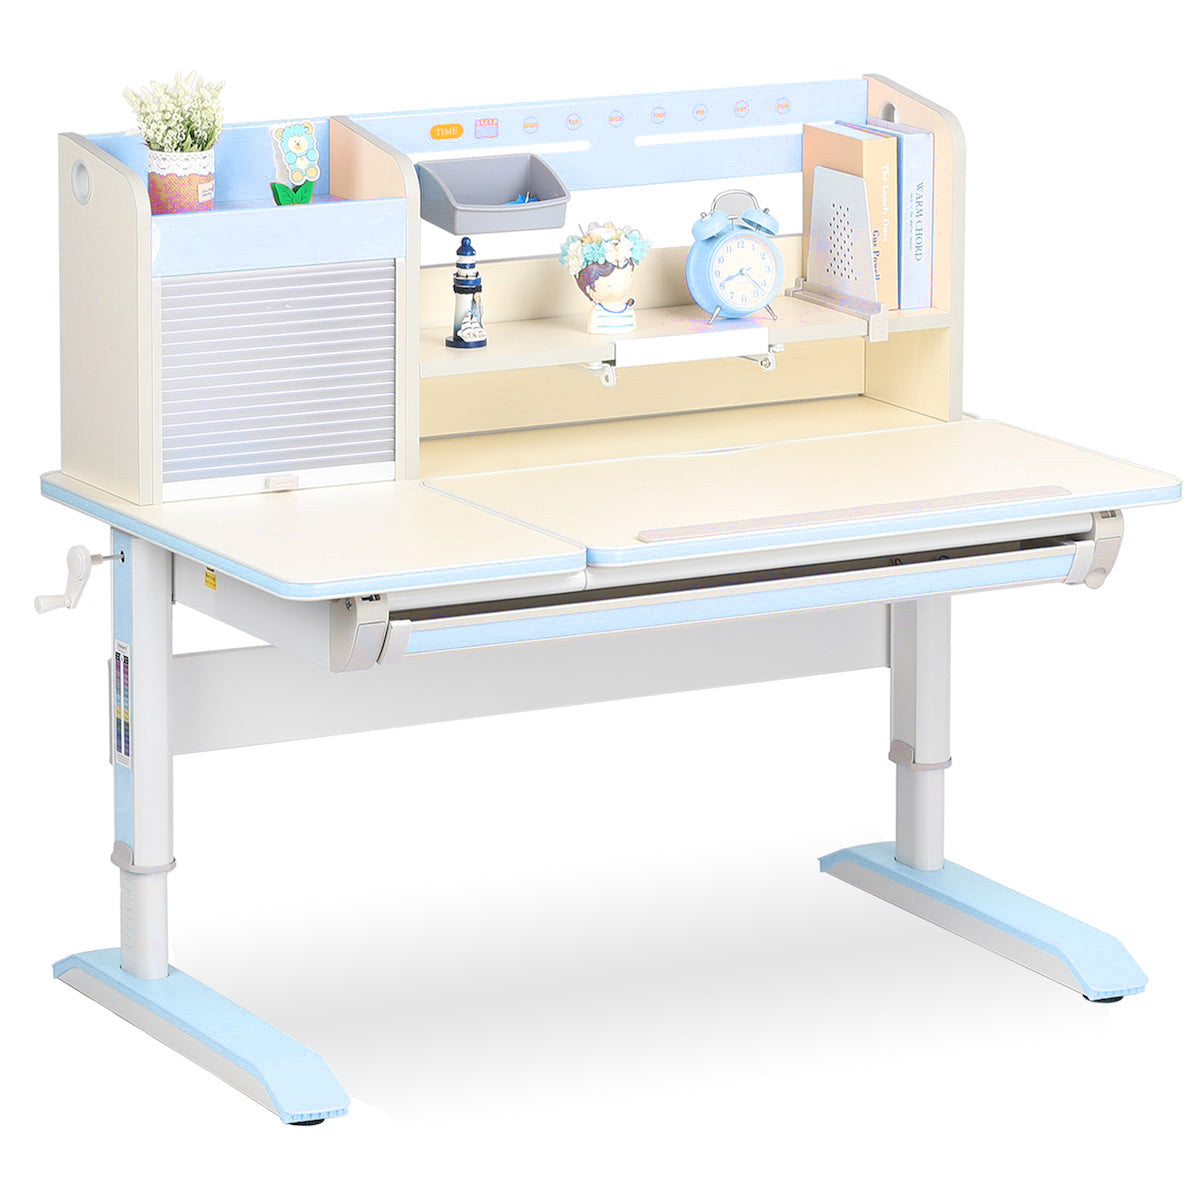 IMPACT Ergo-Growing Kids Study Desk And Chair  - IM-D12L1200V2-BL 1200x700